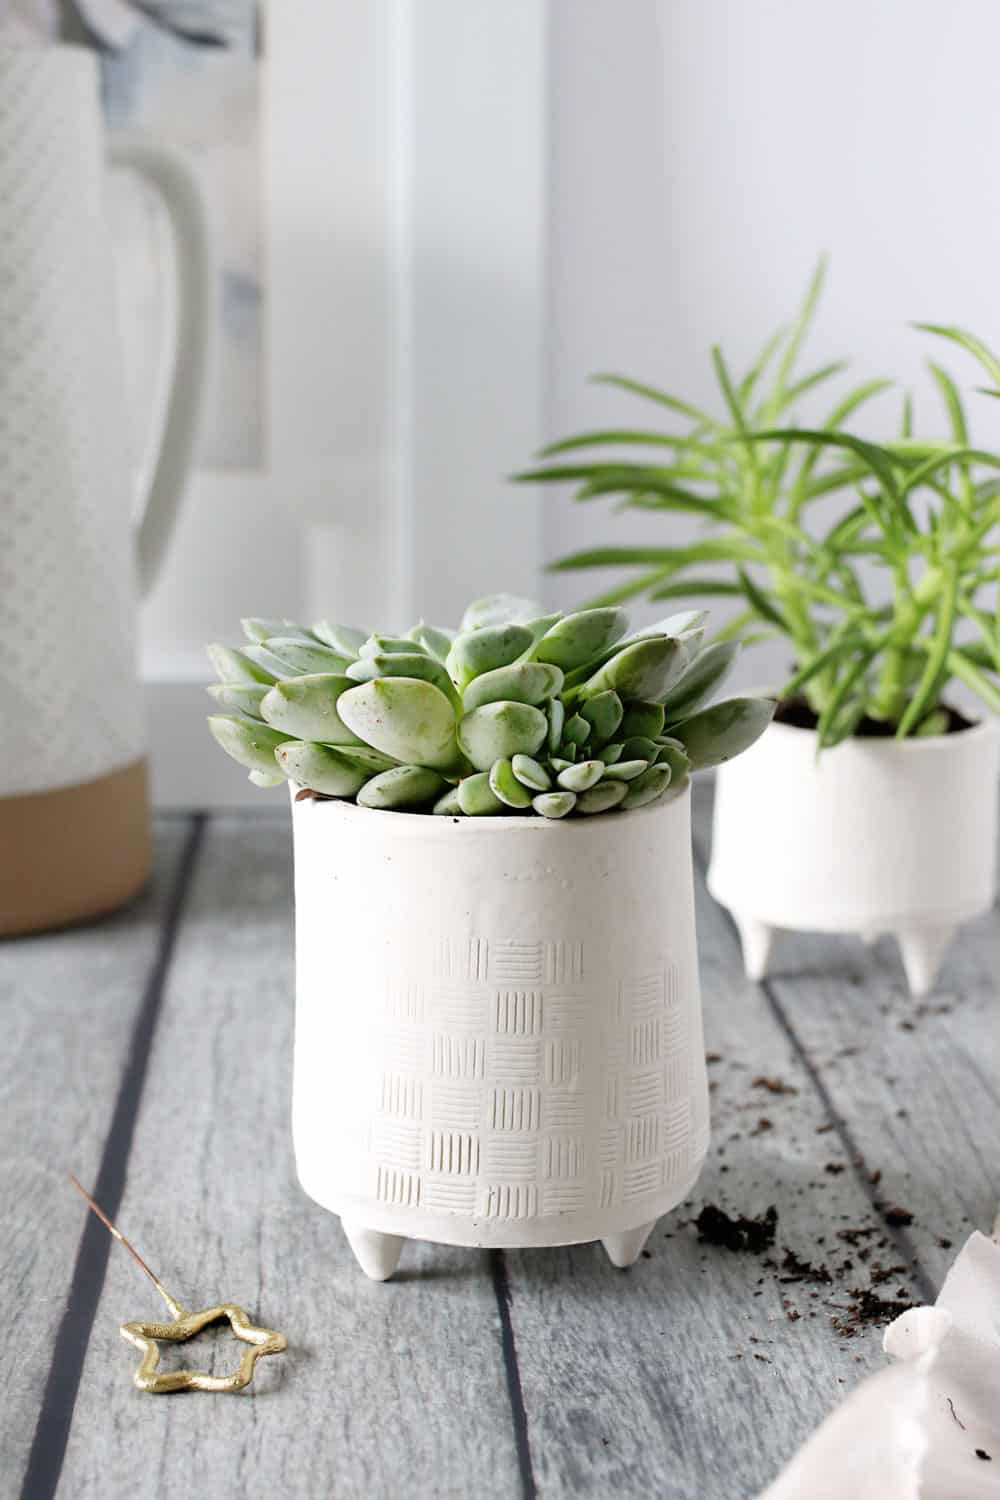 Succulents give any room a fresh touch and bring the outdoors inside